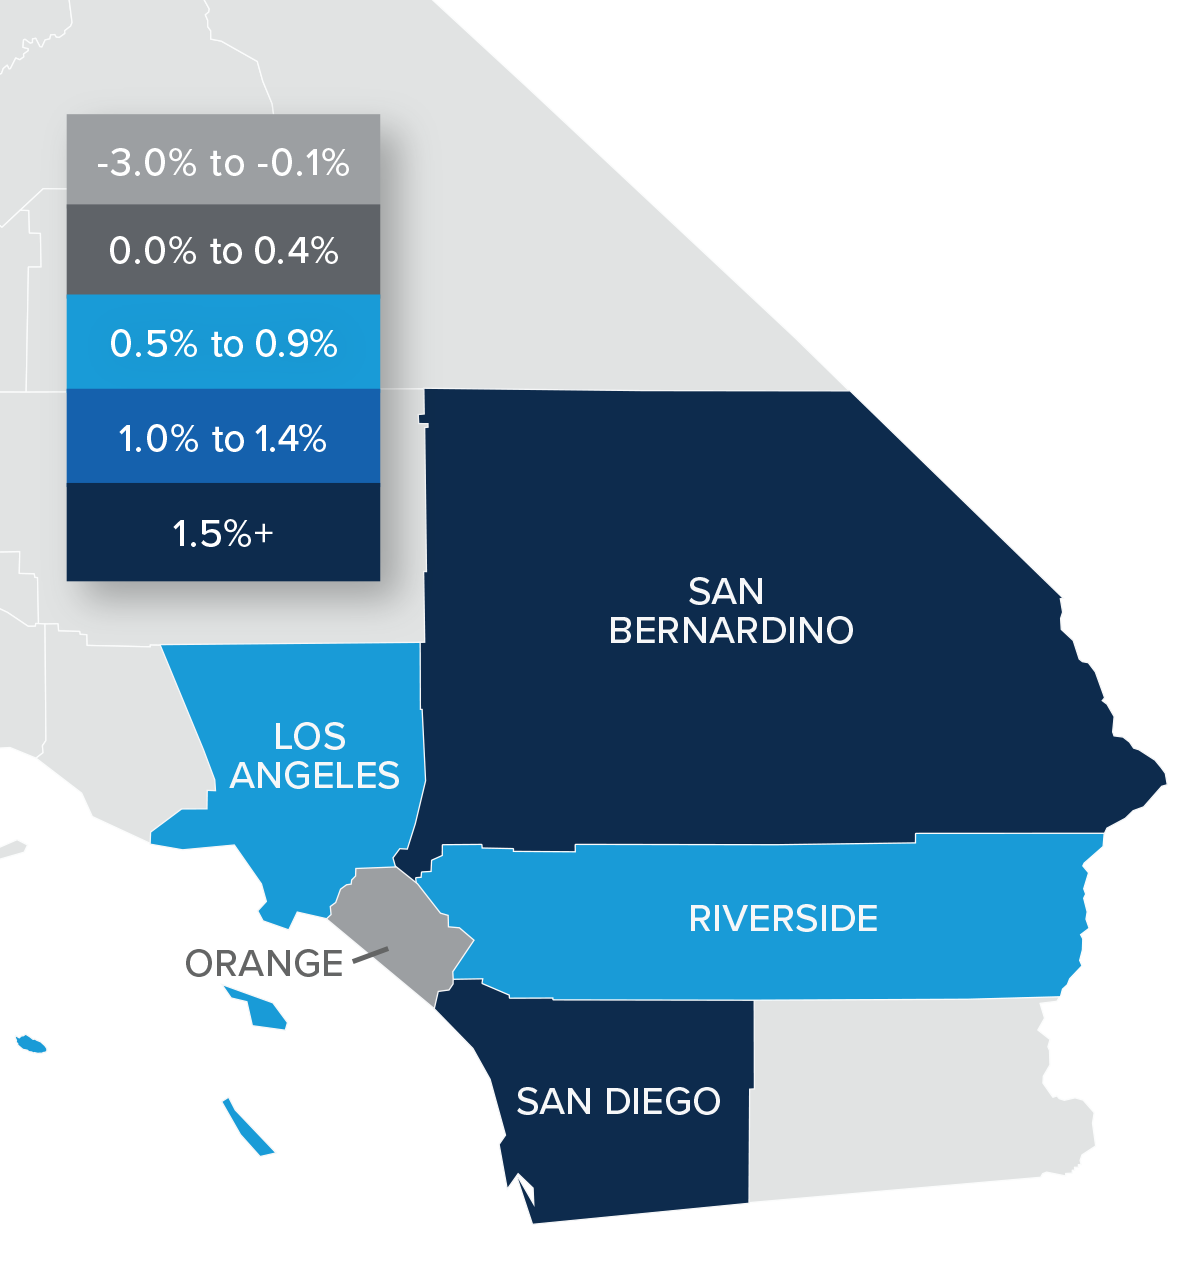 A map showing the real estate home prices percentage changes for various counties in Southern California. Different colors correspond to different tiers of percentage change. Orange County have a percentage change in the -3% to -0.1% range, Los Angeles and Riverside are in the 0.5% to 0.9% change range, and San Diego and San Bernardino are in the 1.5%+ change range.